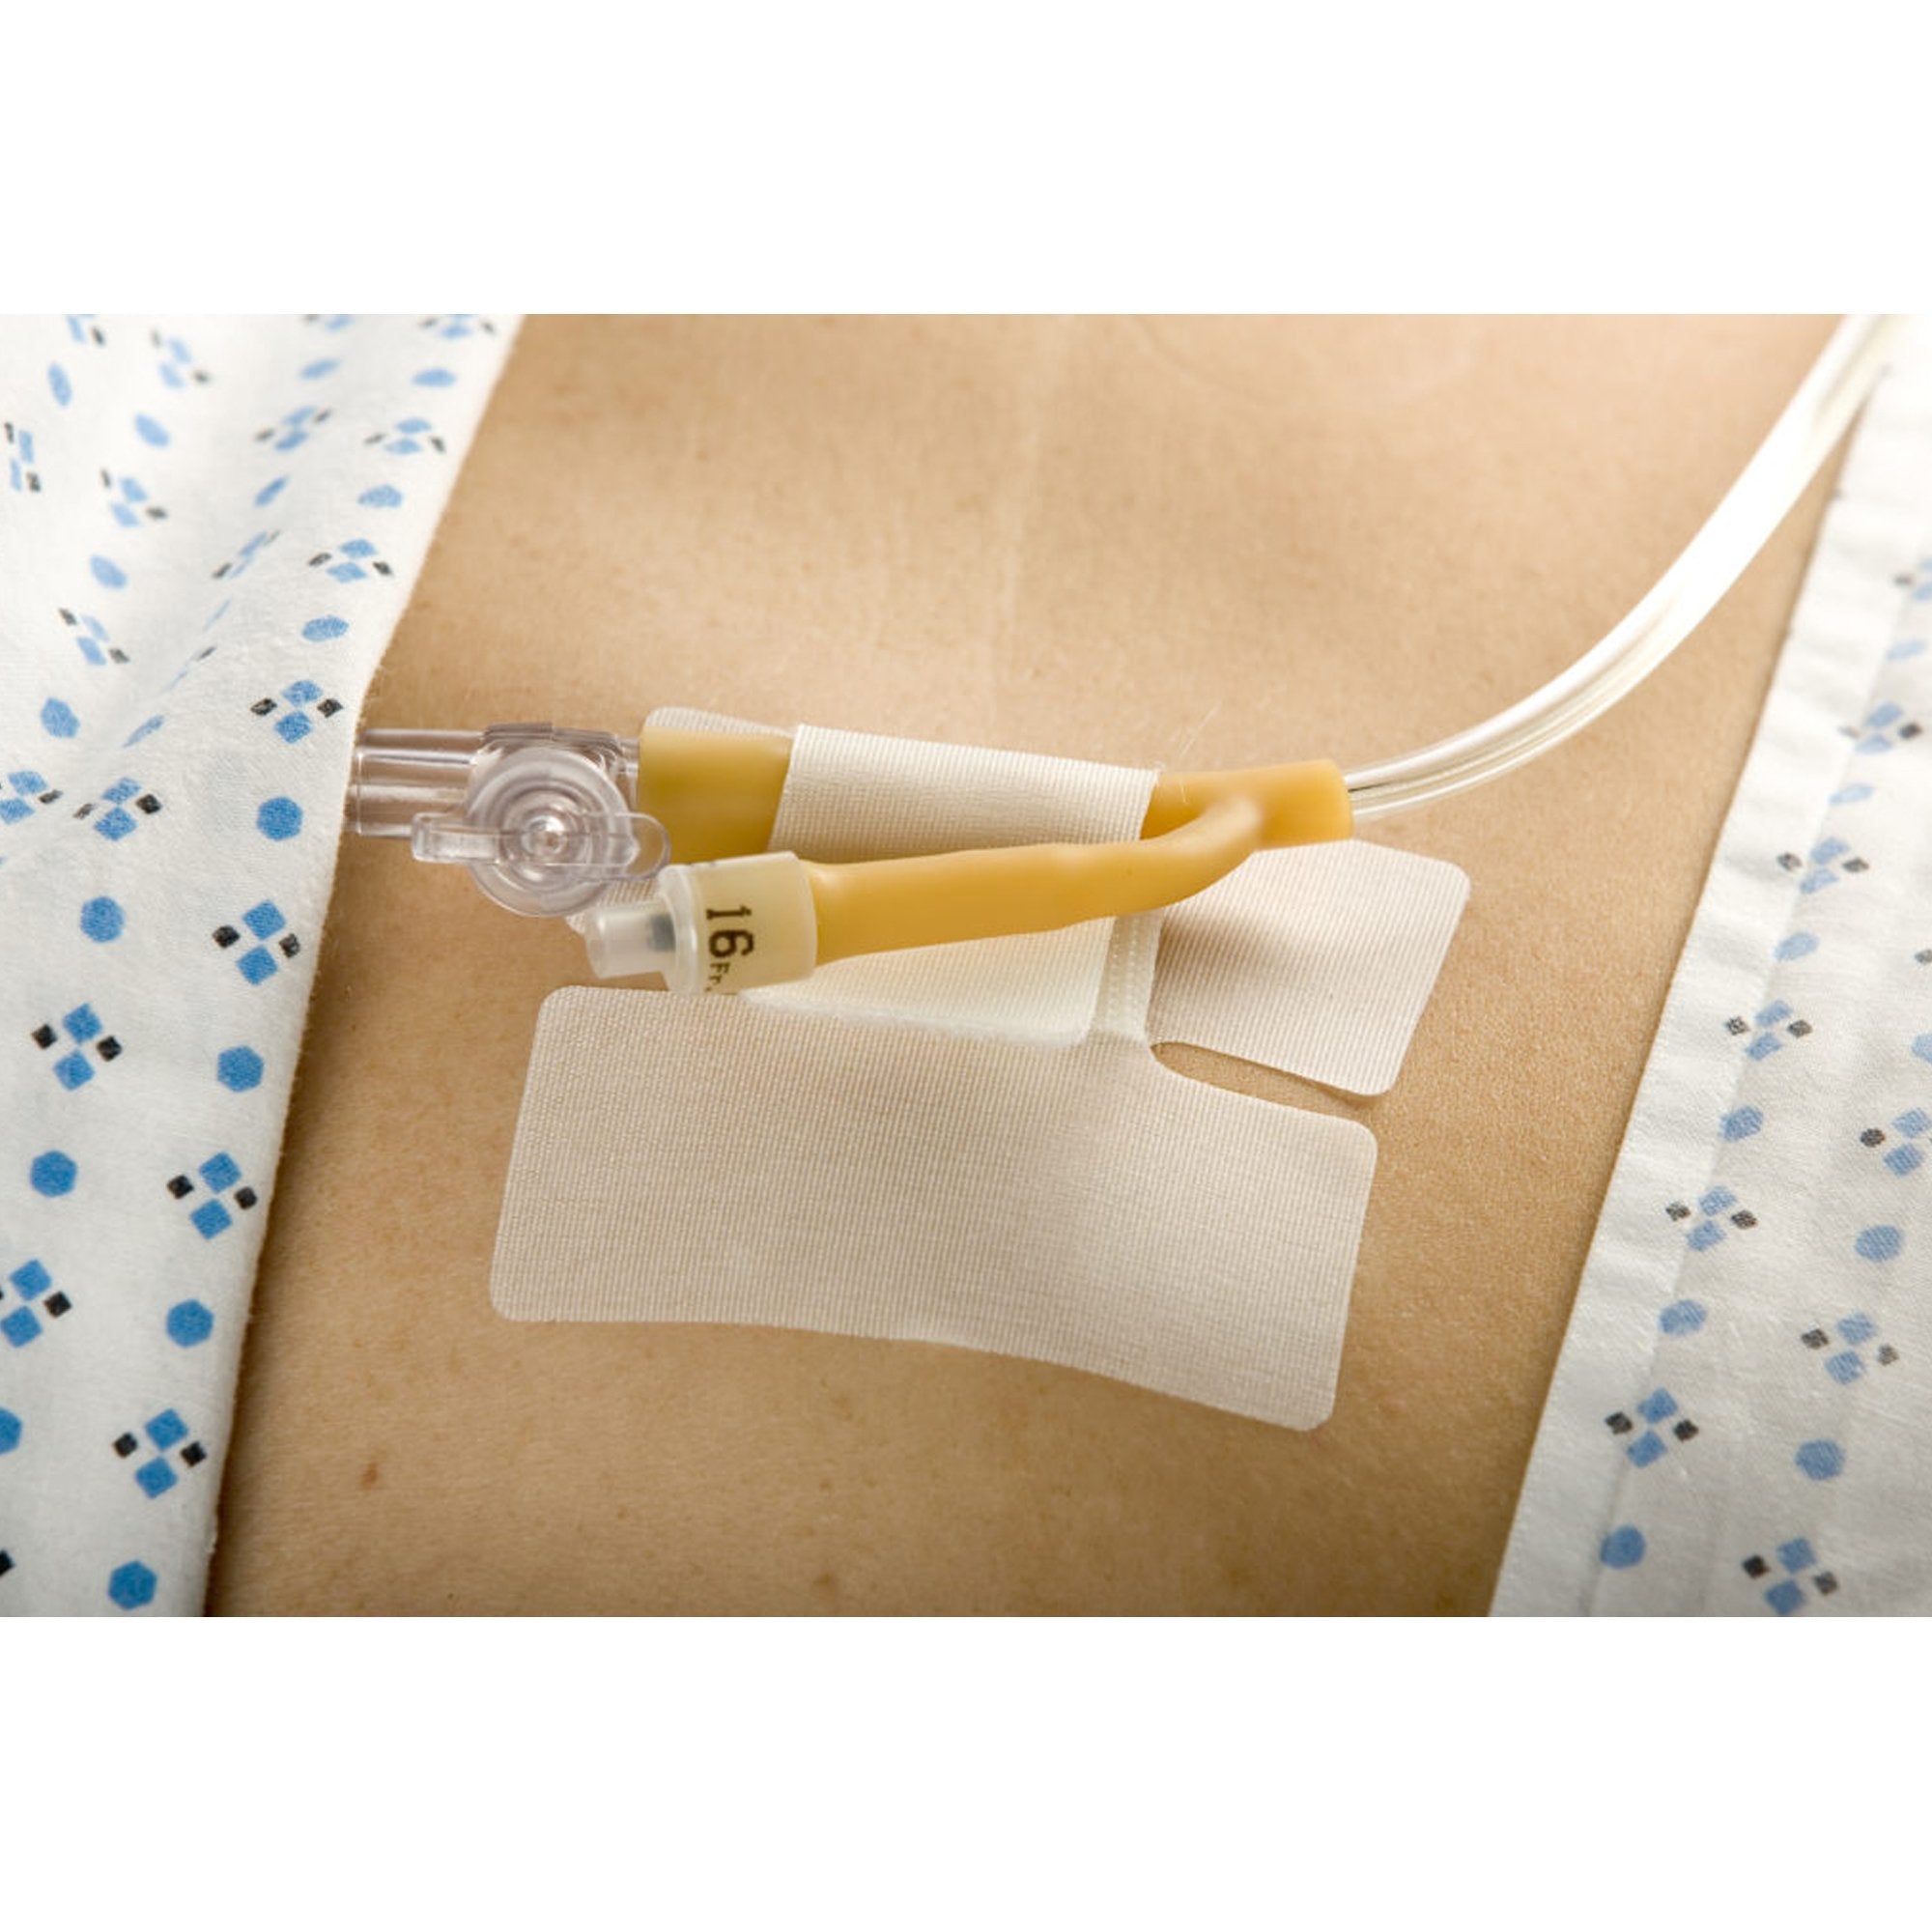 Holder, Tube Cath-Secure Single Hook and Loop Tab, Hypoallergenic Tape, Butterfly Design